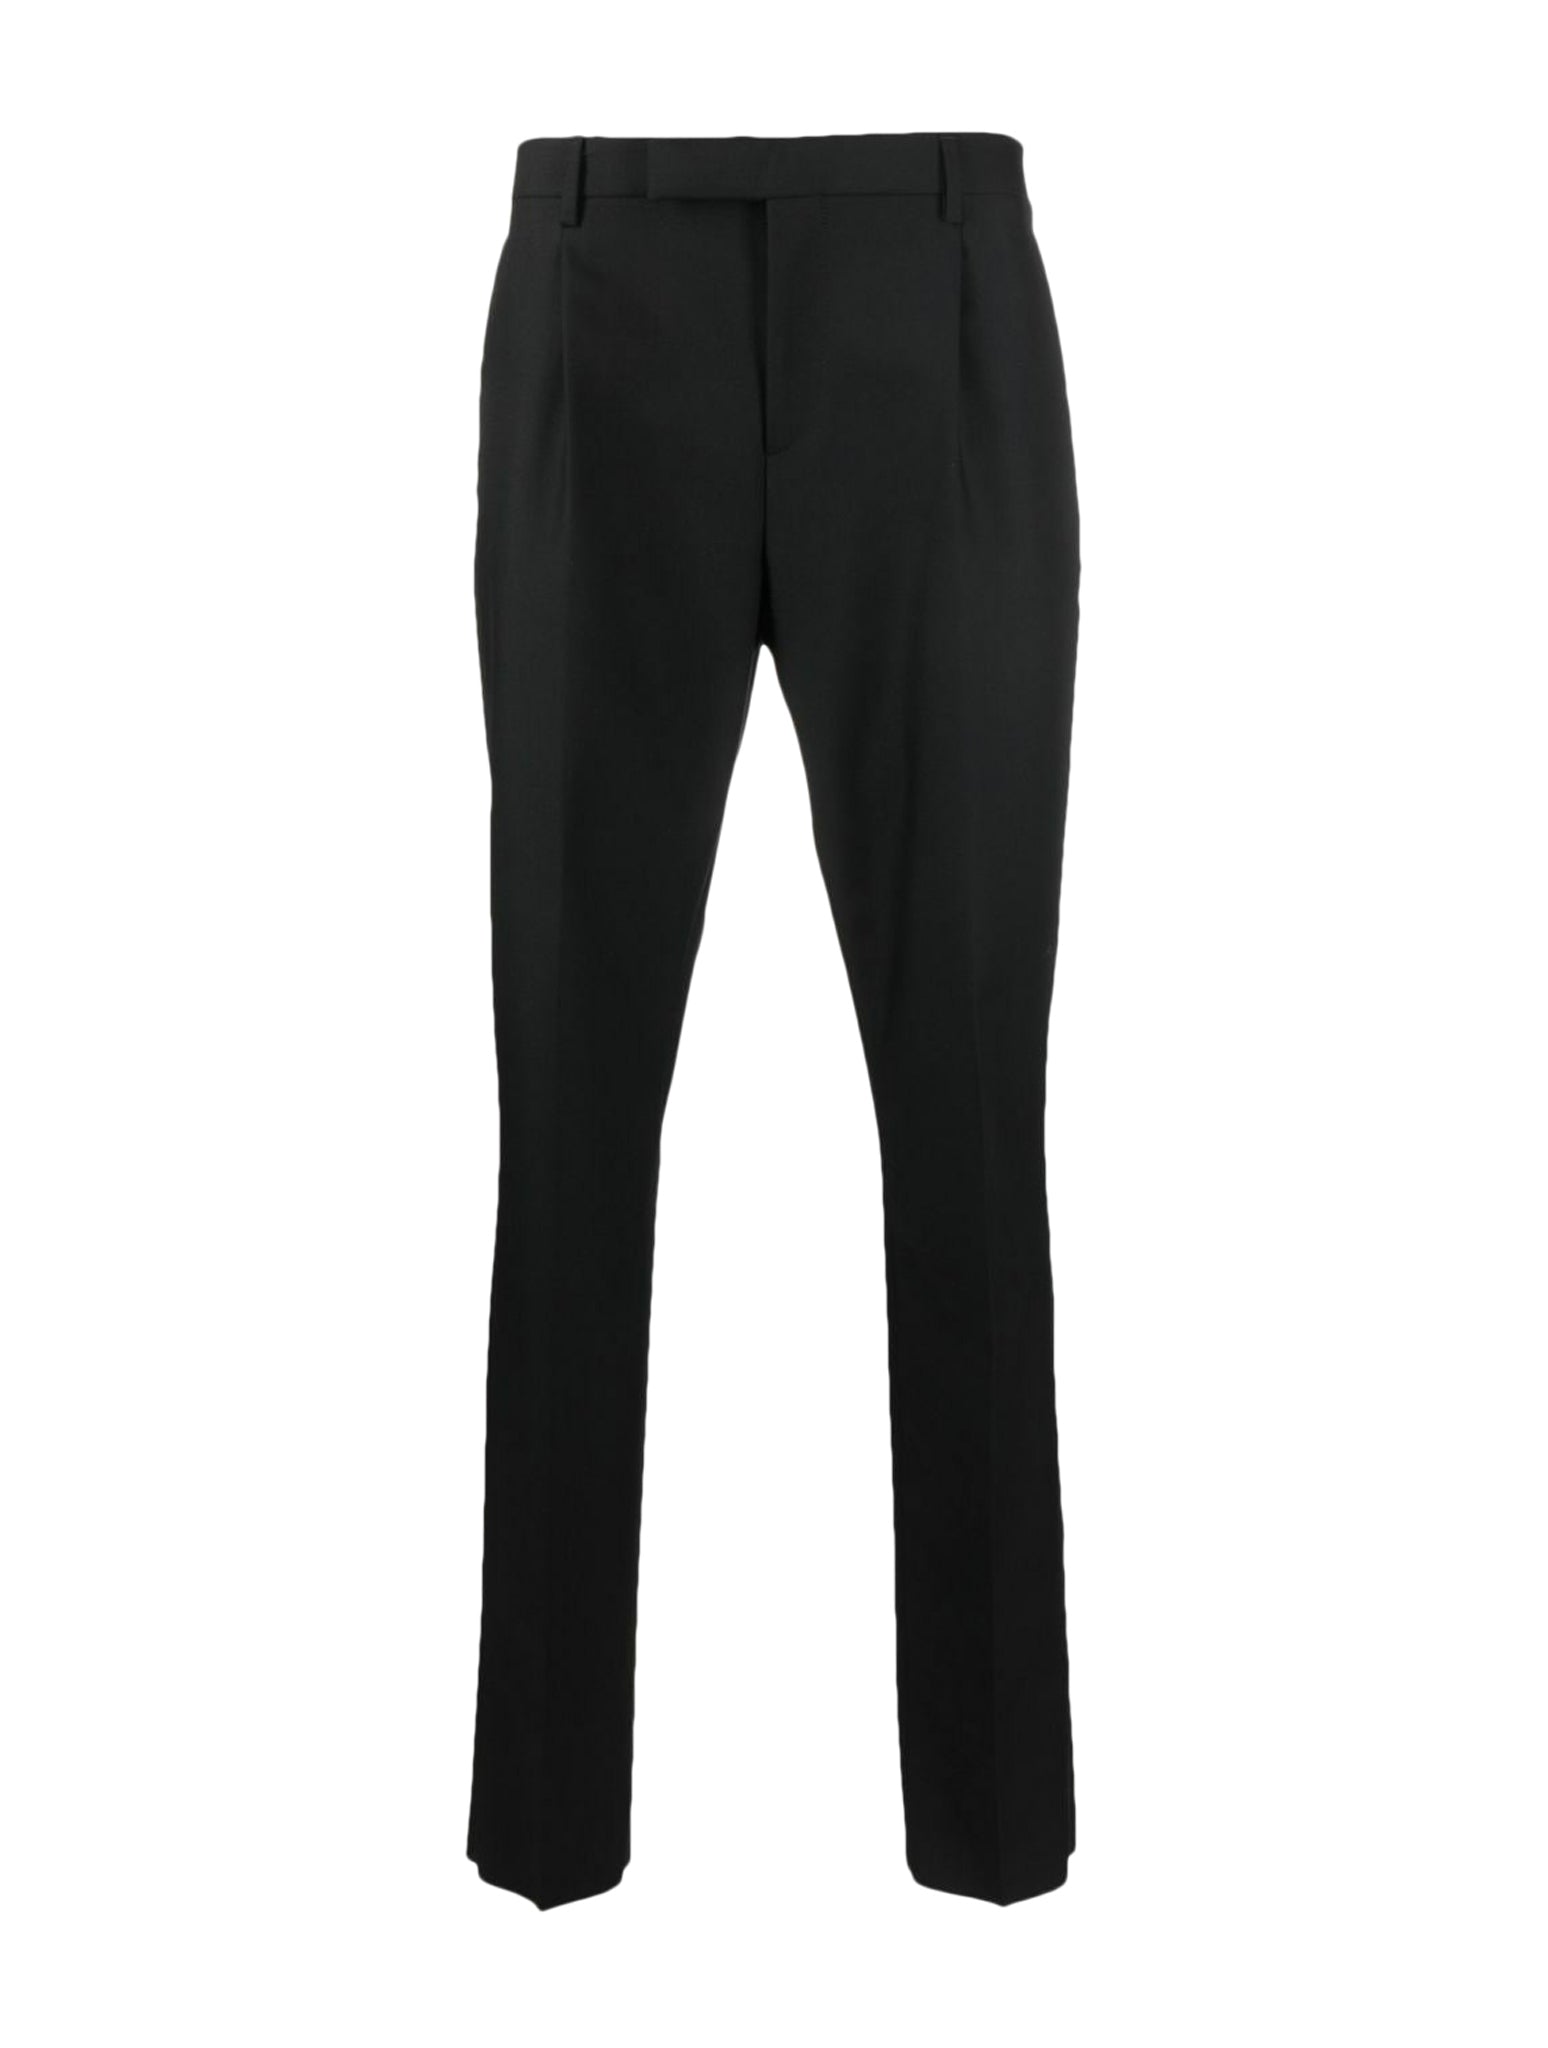 pressed-crease tapered-leg trousers